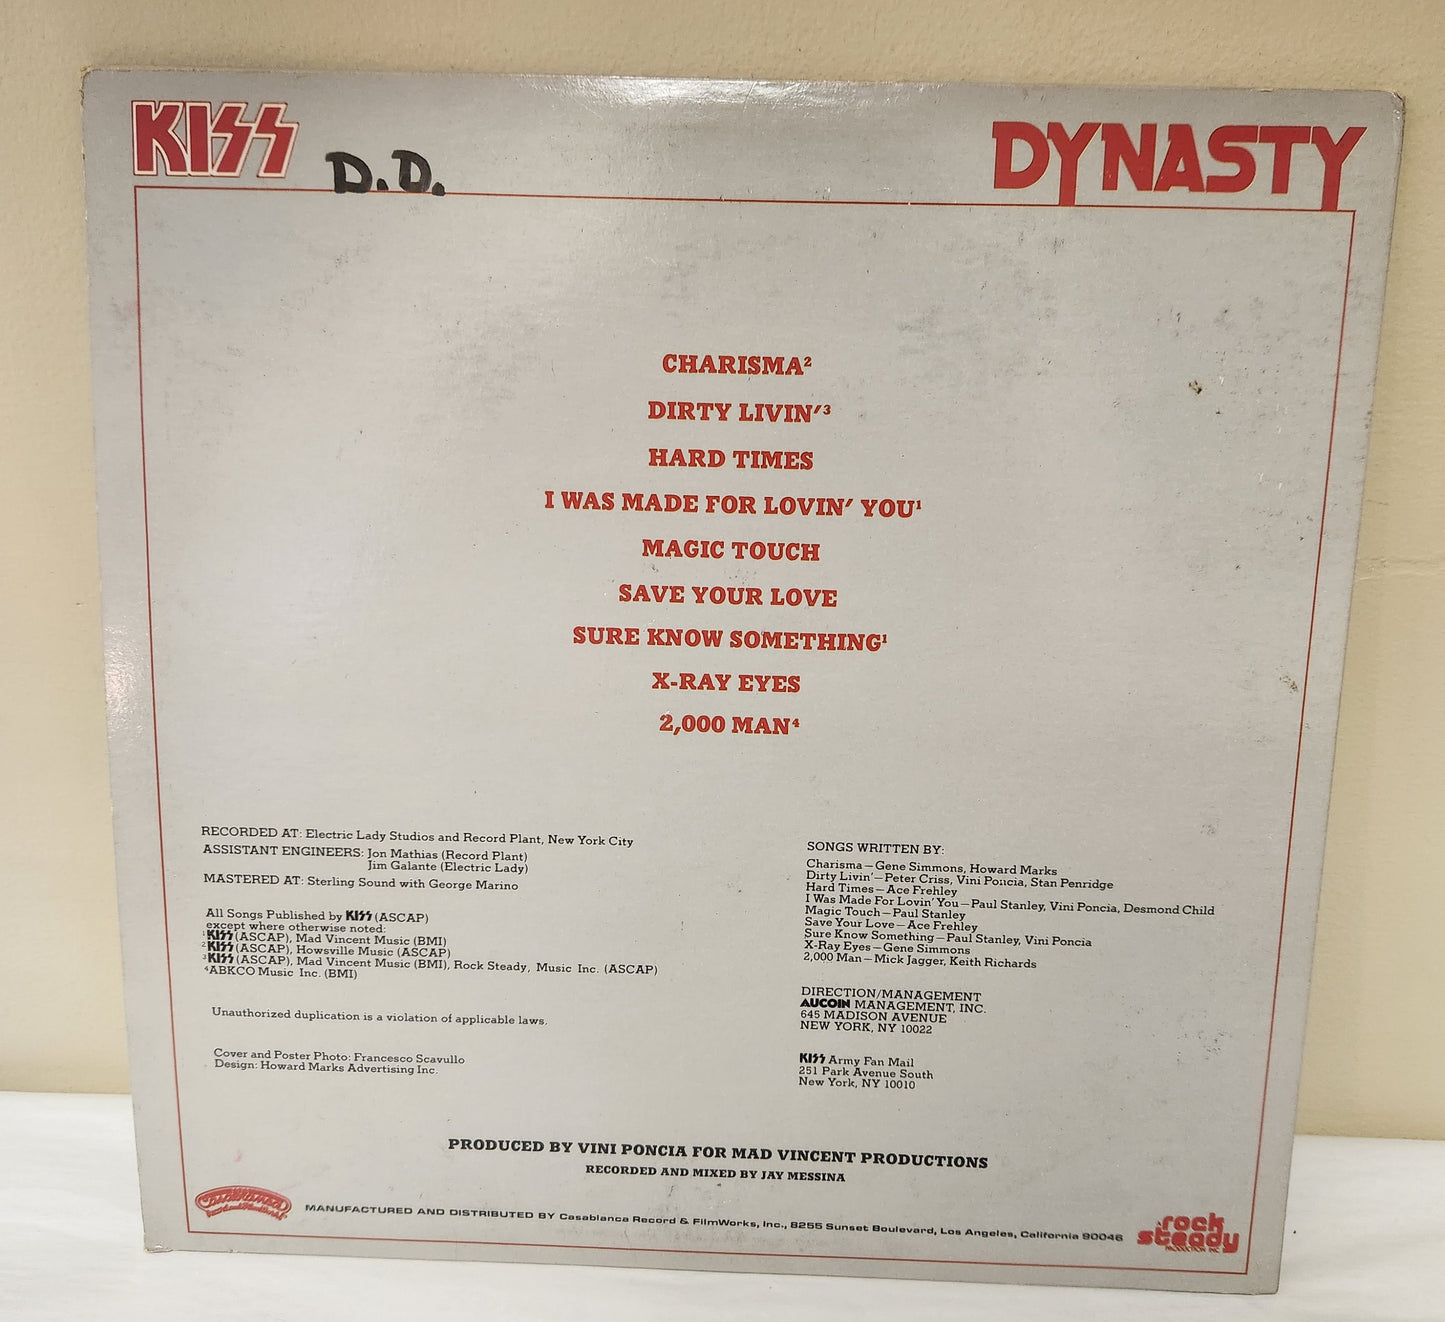 KISS "Dynasty" 1979 Hard Rock Glam Record Album with Poster